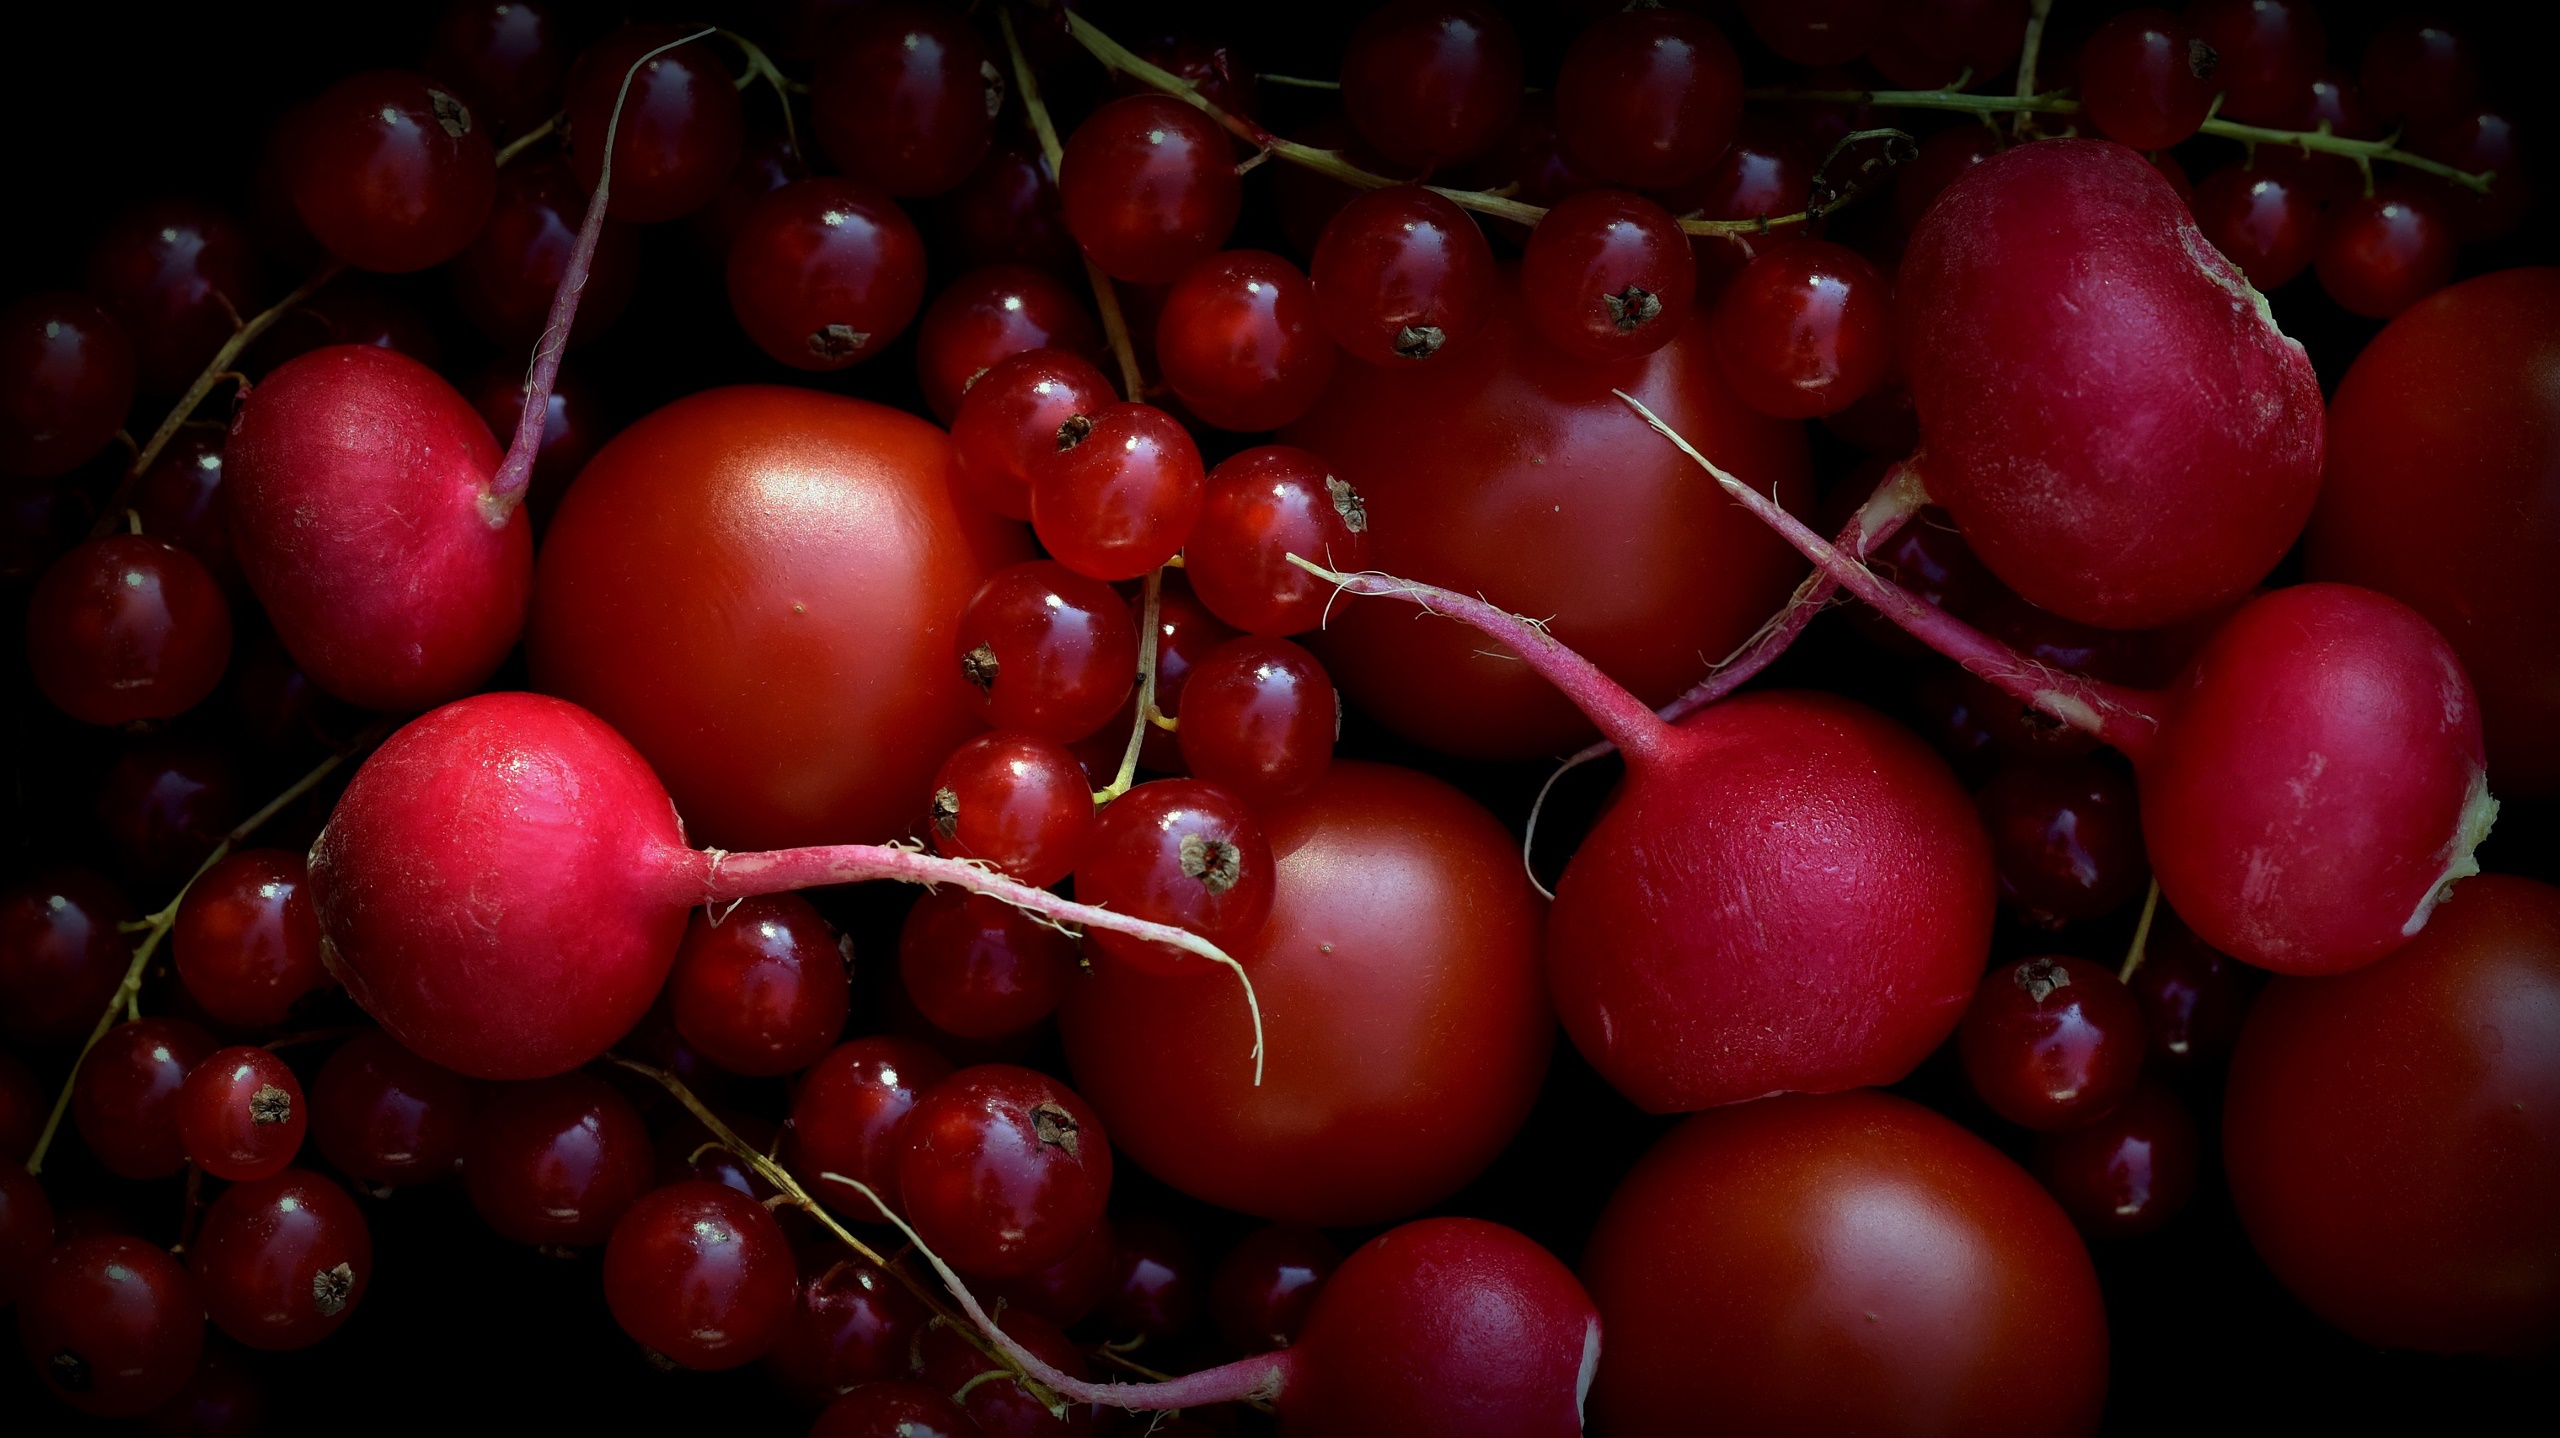 General 2560x1438 red food fruit vegetables radish tomatoes red currant closeup